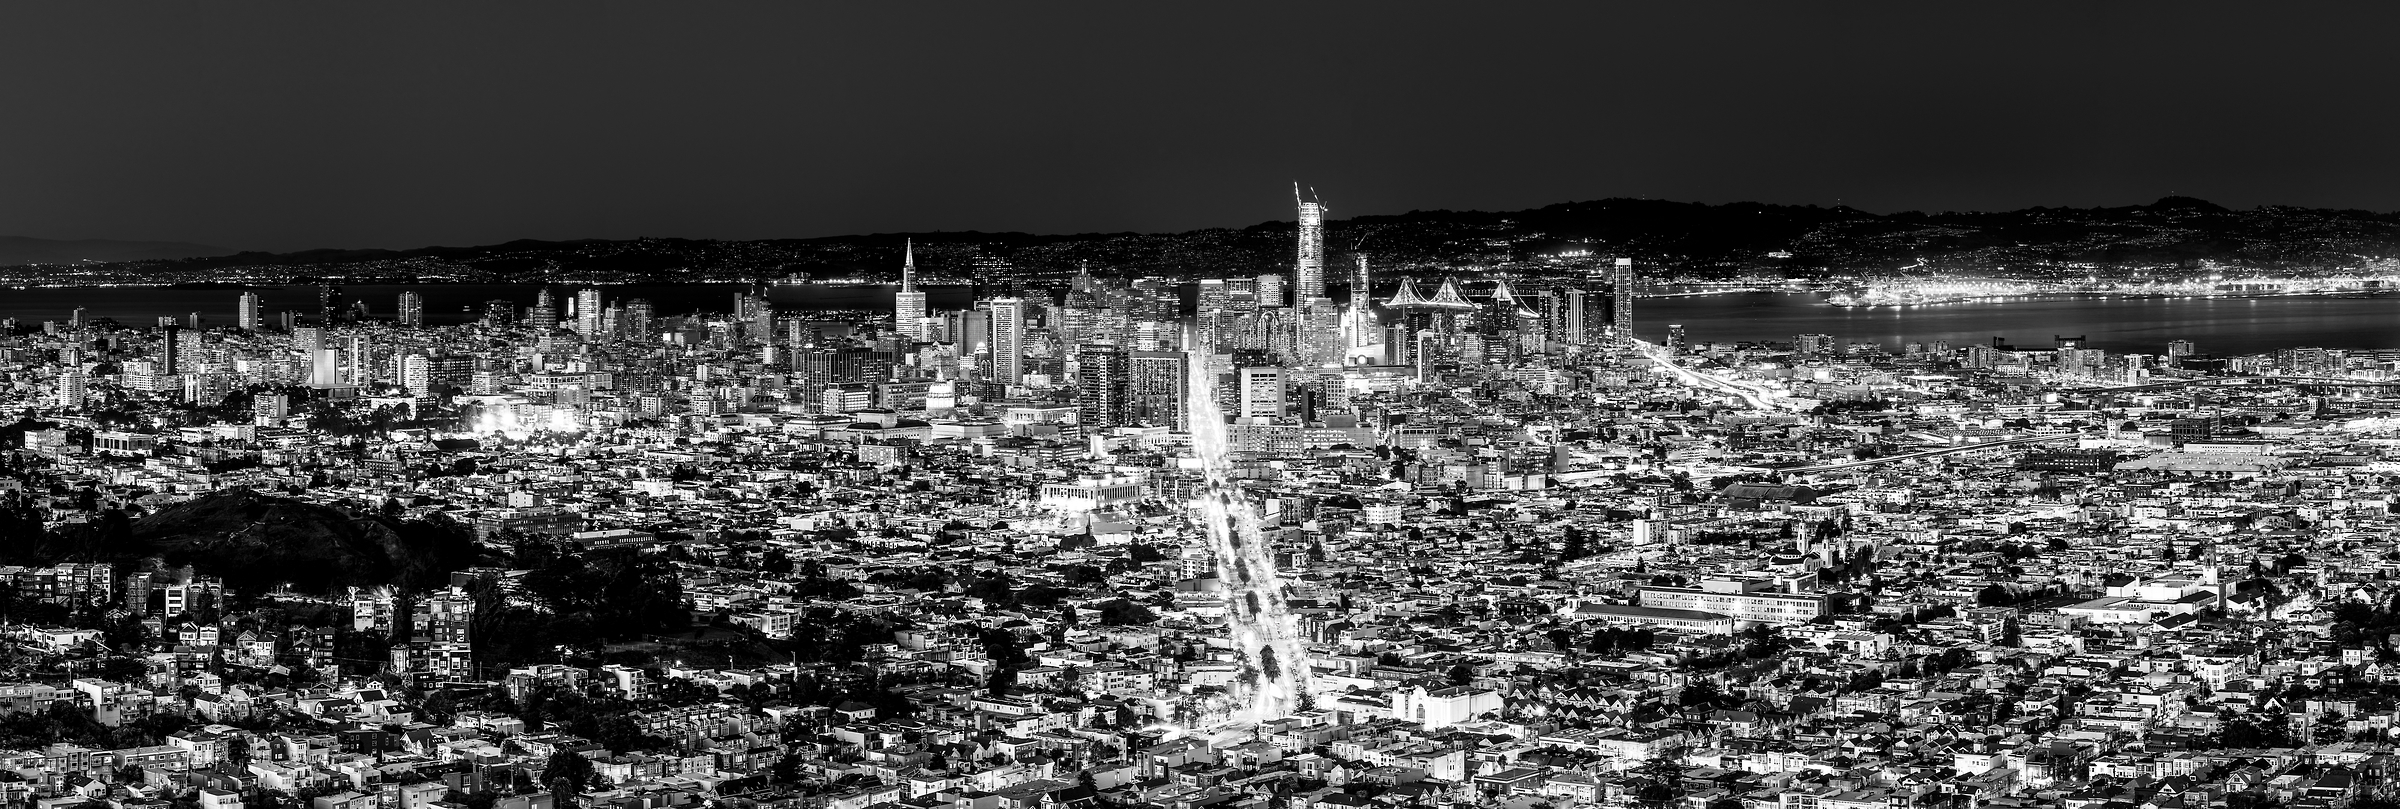 363 megapixels! A very high resolution, large-format VAST photo of the Downtown San Francisco city skyline at sunset dusk; fine art black and white cityscape photograph created by Justin Katz in California